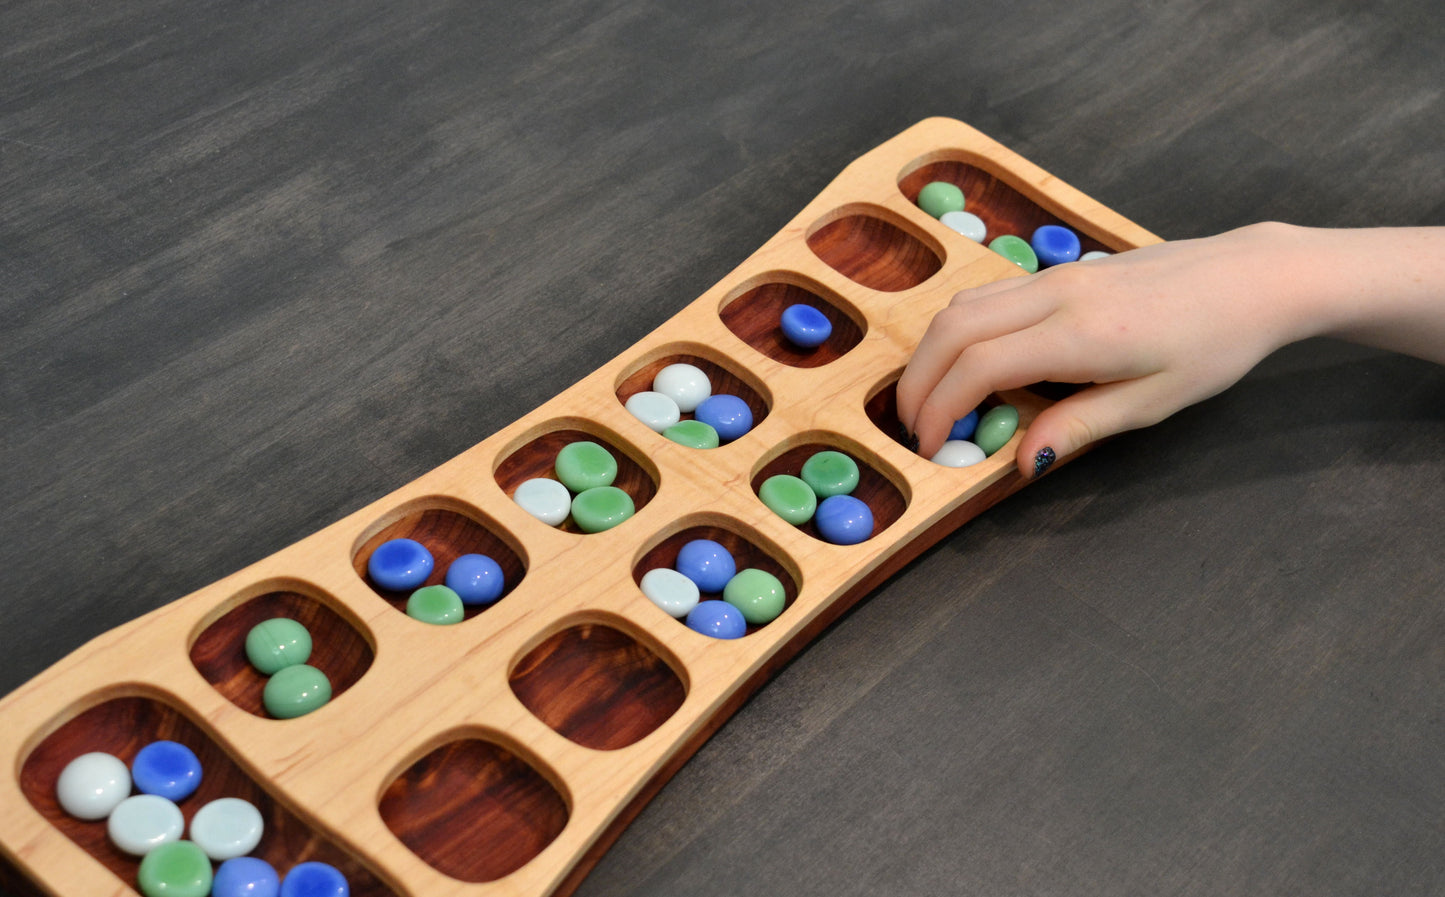 child playing mancala game with handmade wooden board